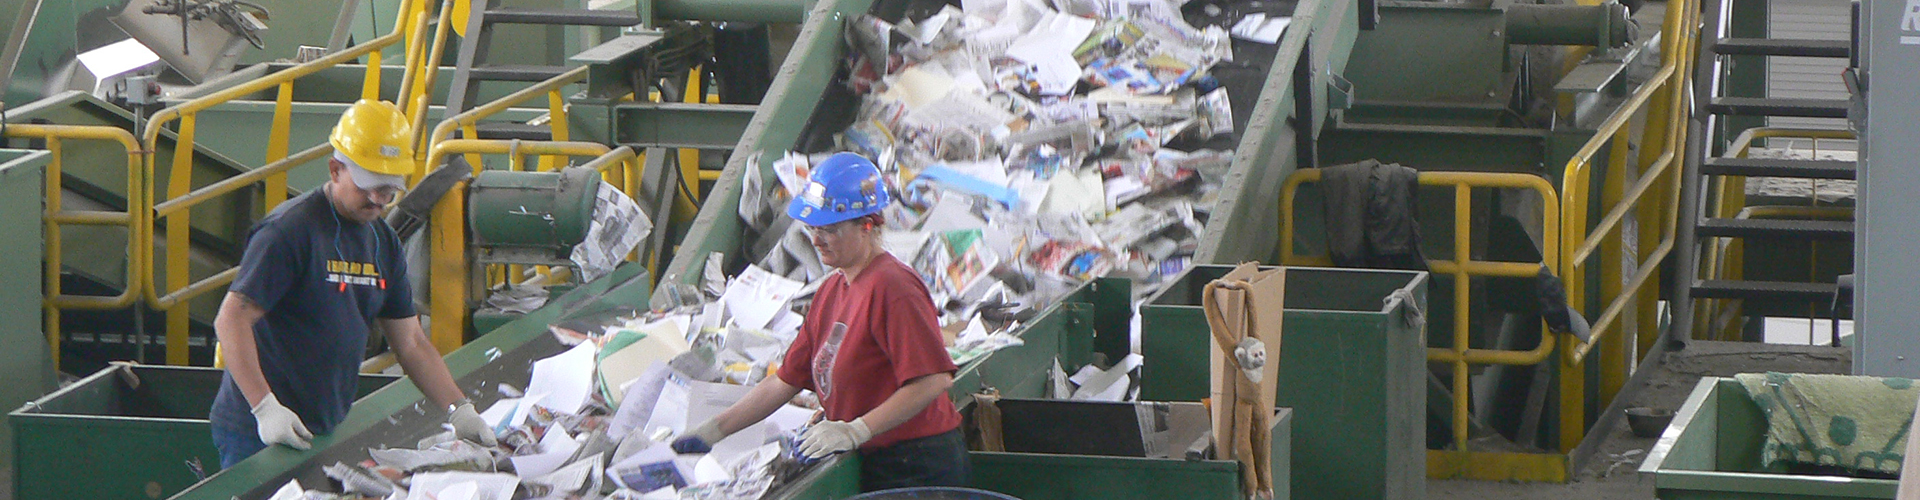 Single-stream recycling at the Recycling Center